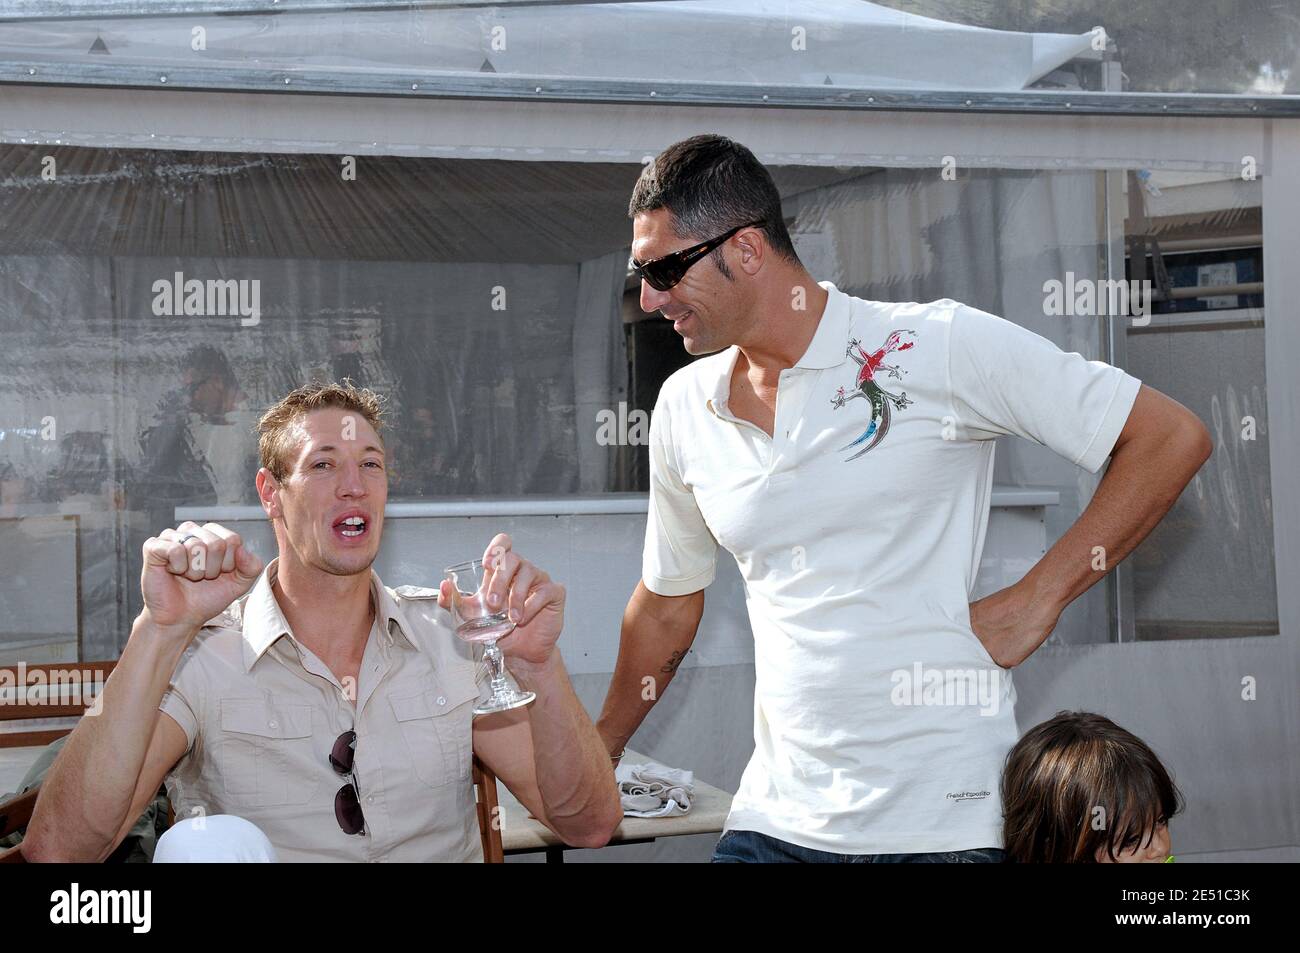 France's Alain Bernard speaks with coach and former swimmer Franck Esposito who presents his new collection on the beach Miramar on 'La Croisette' in Cannes, France on May 12, 2008. Photo by Capbern/Cameleon/ABACAPRESS.COM Stock Photo